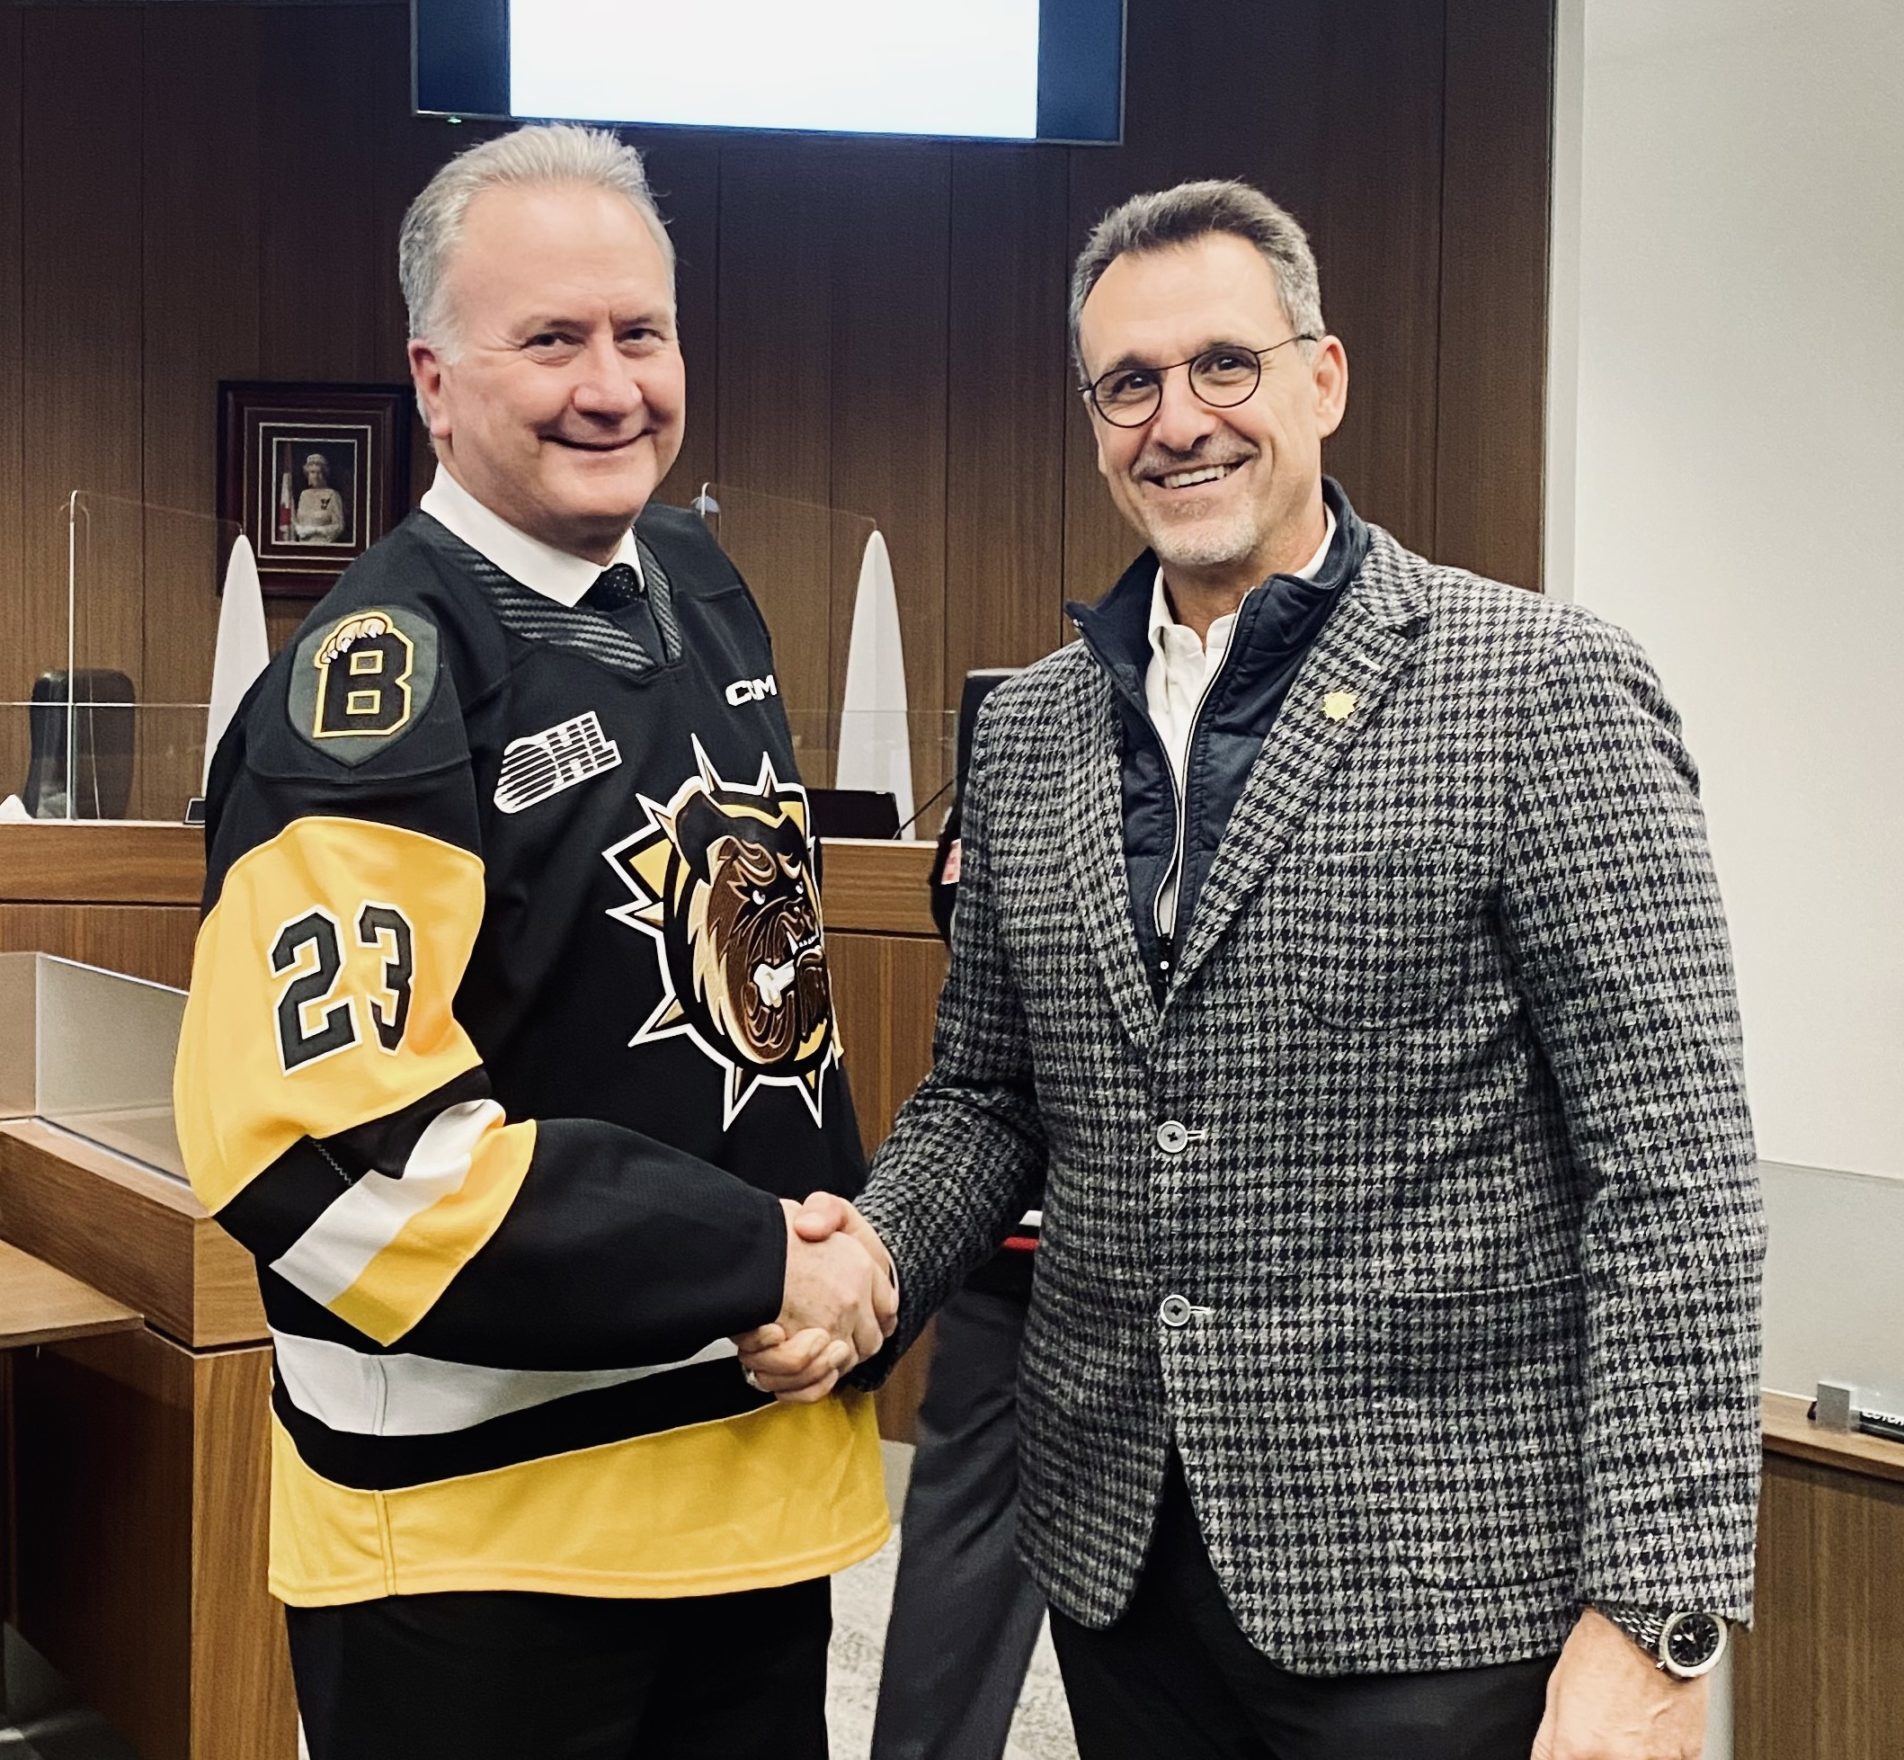 Brantford City Council officially welcomes OHL Bulldogs to Brantford - City  of Brantford